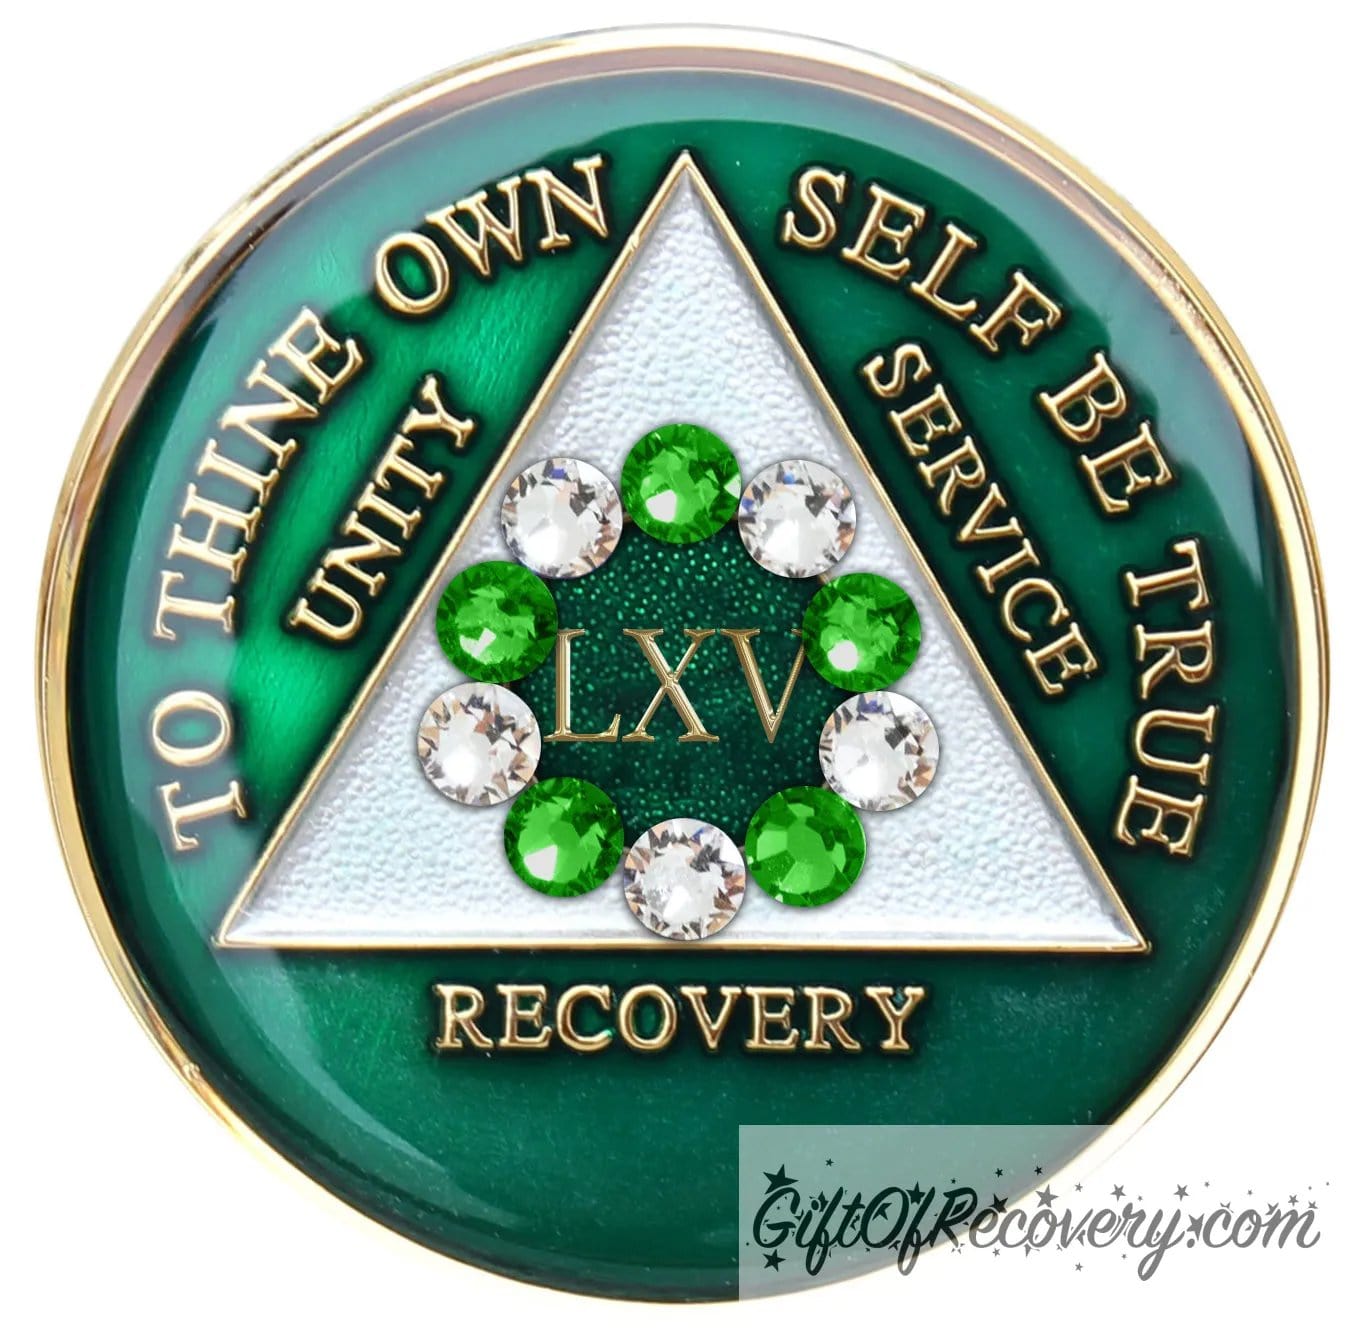 65 year emerald green AA medallion with the 10th step in emphasis in the center, 5 emerald green genuine crystals and 5 clear genuine crystals, inside the triangle is pearl white, while the circle is sparkle green. To thine own self be true, unity, service, recovery, and the roman numeral 1, are 14k gold and sealed with resin for a glossy finish.